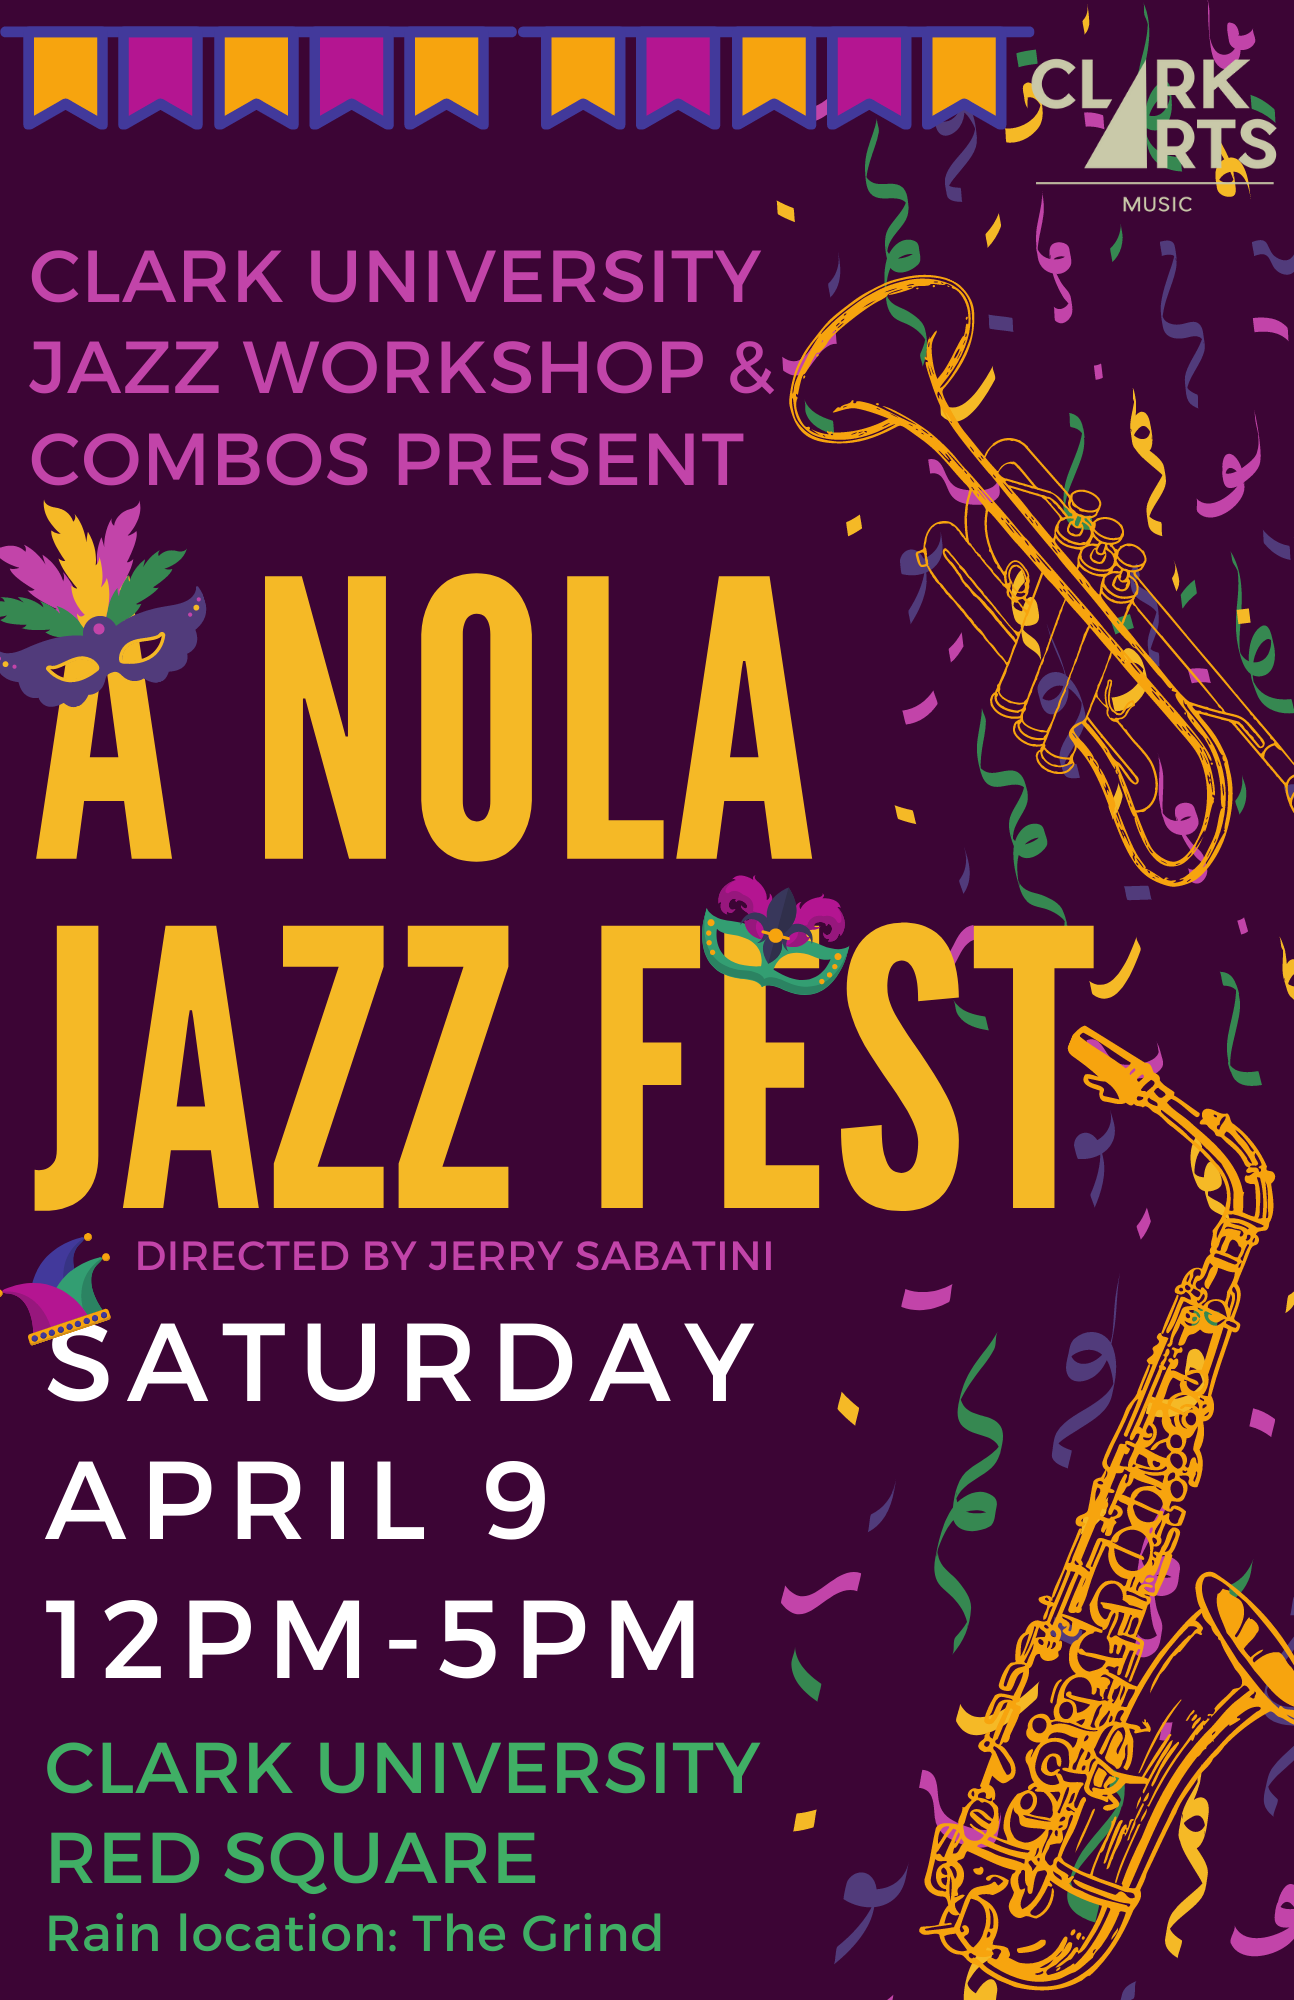 A NOLA Jazz Fest Department of Visual and Performing Arts